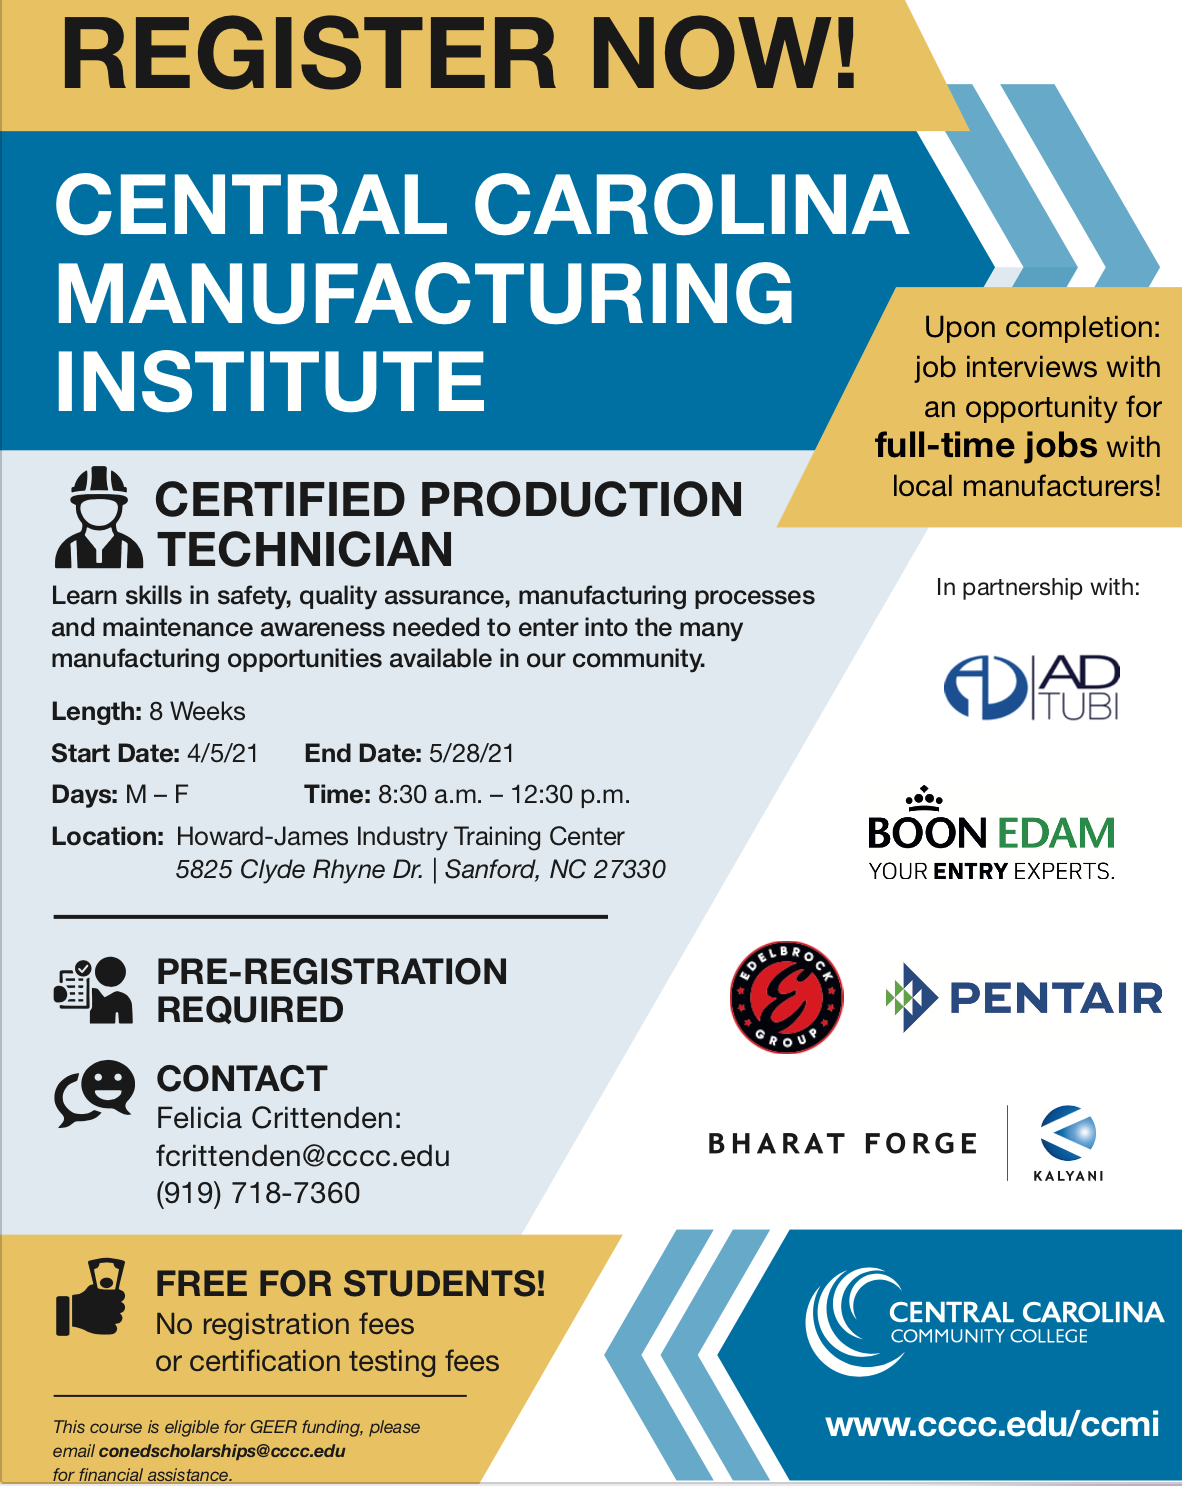 Register now for the Central Carolina Manufacturing Institute